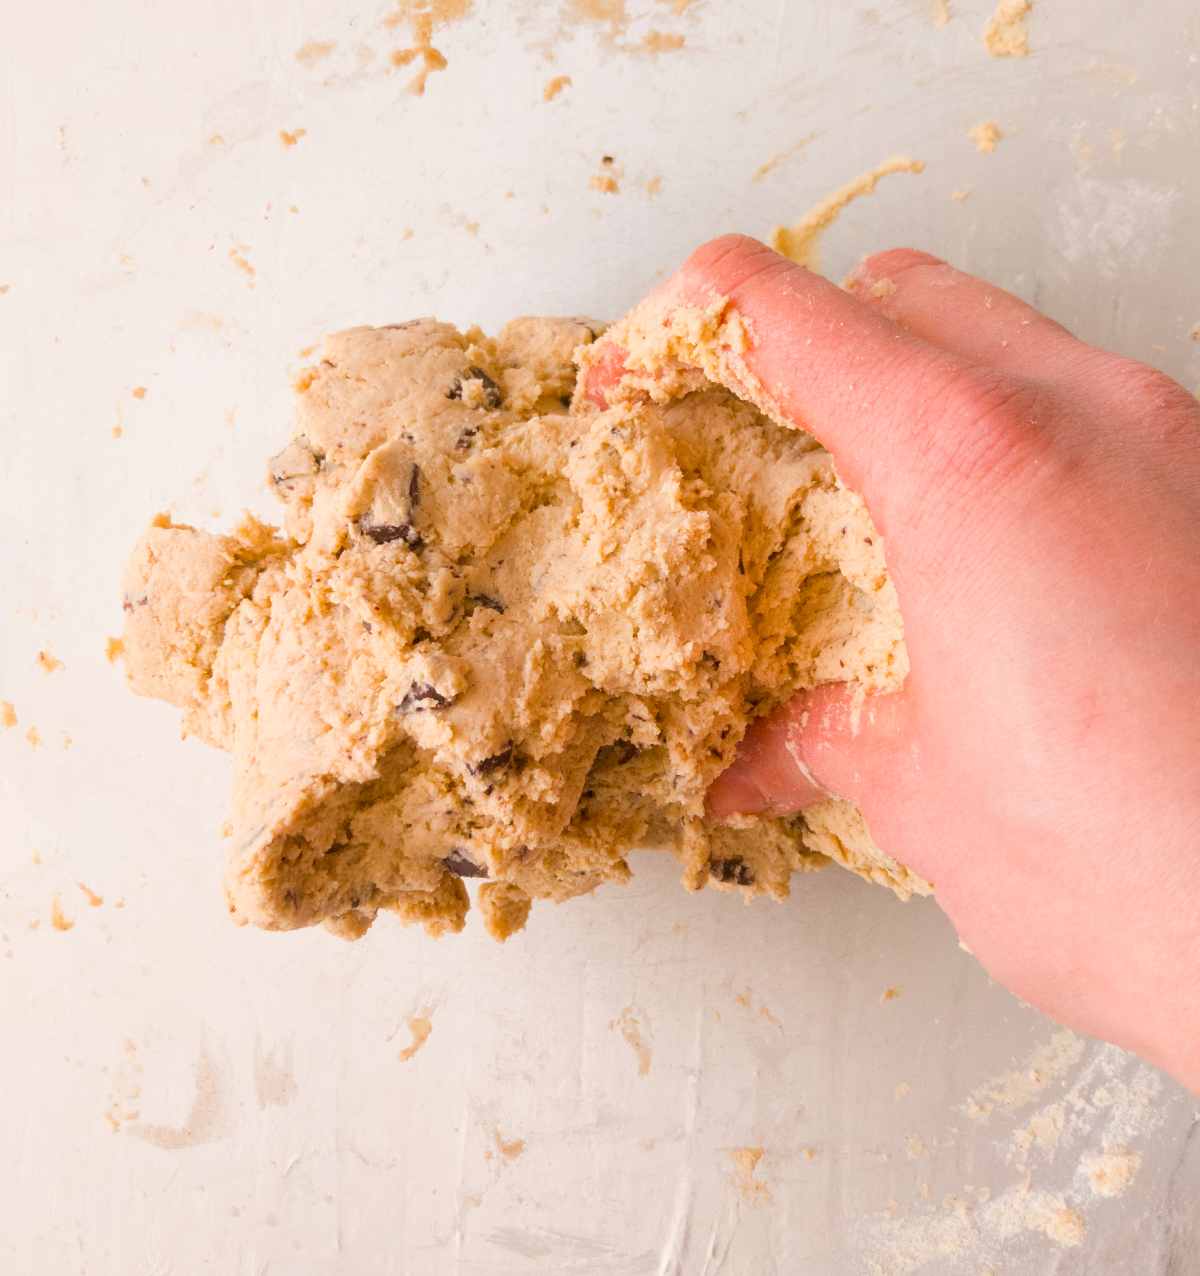 Mixing the dough by hand.